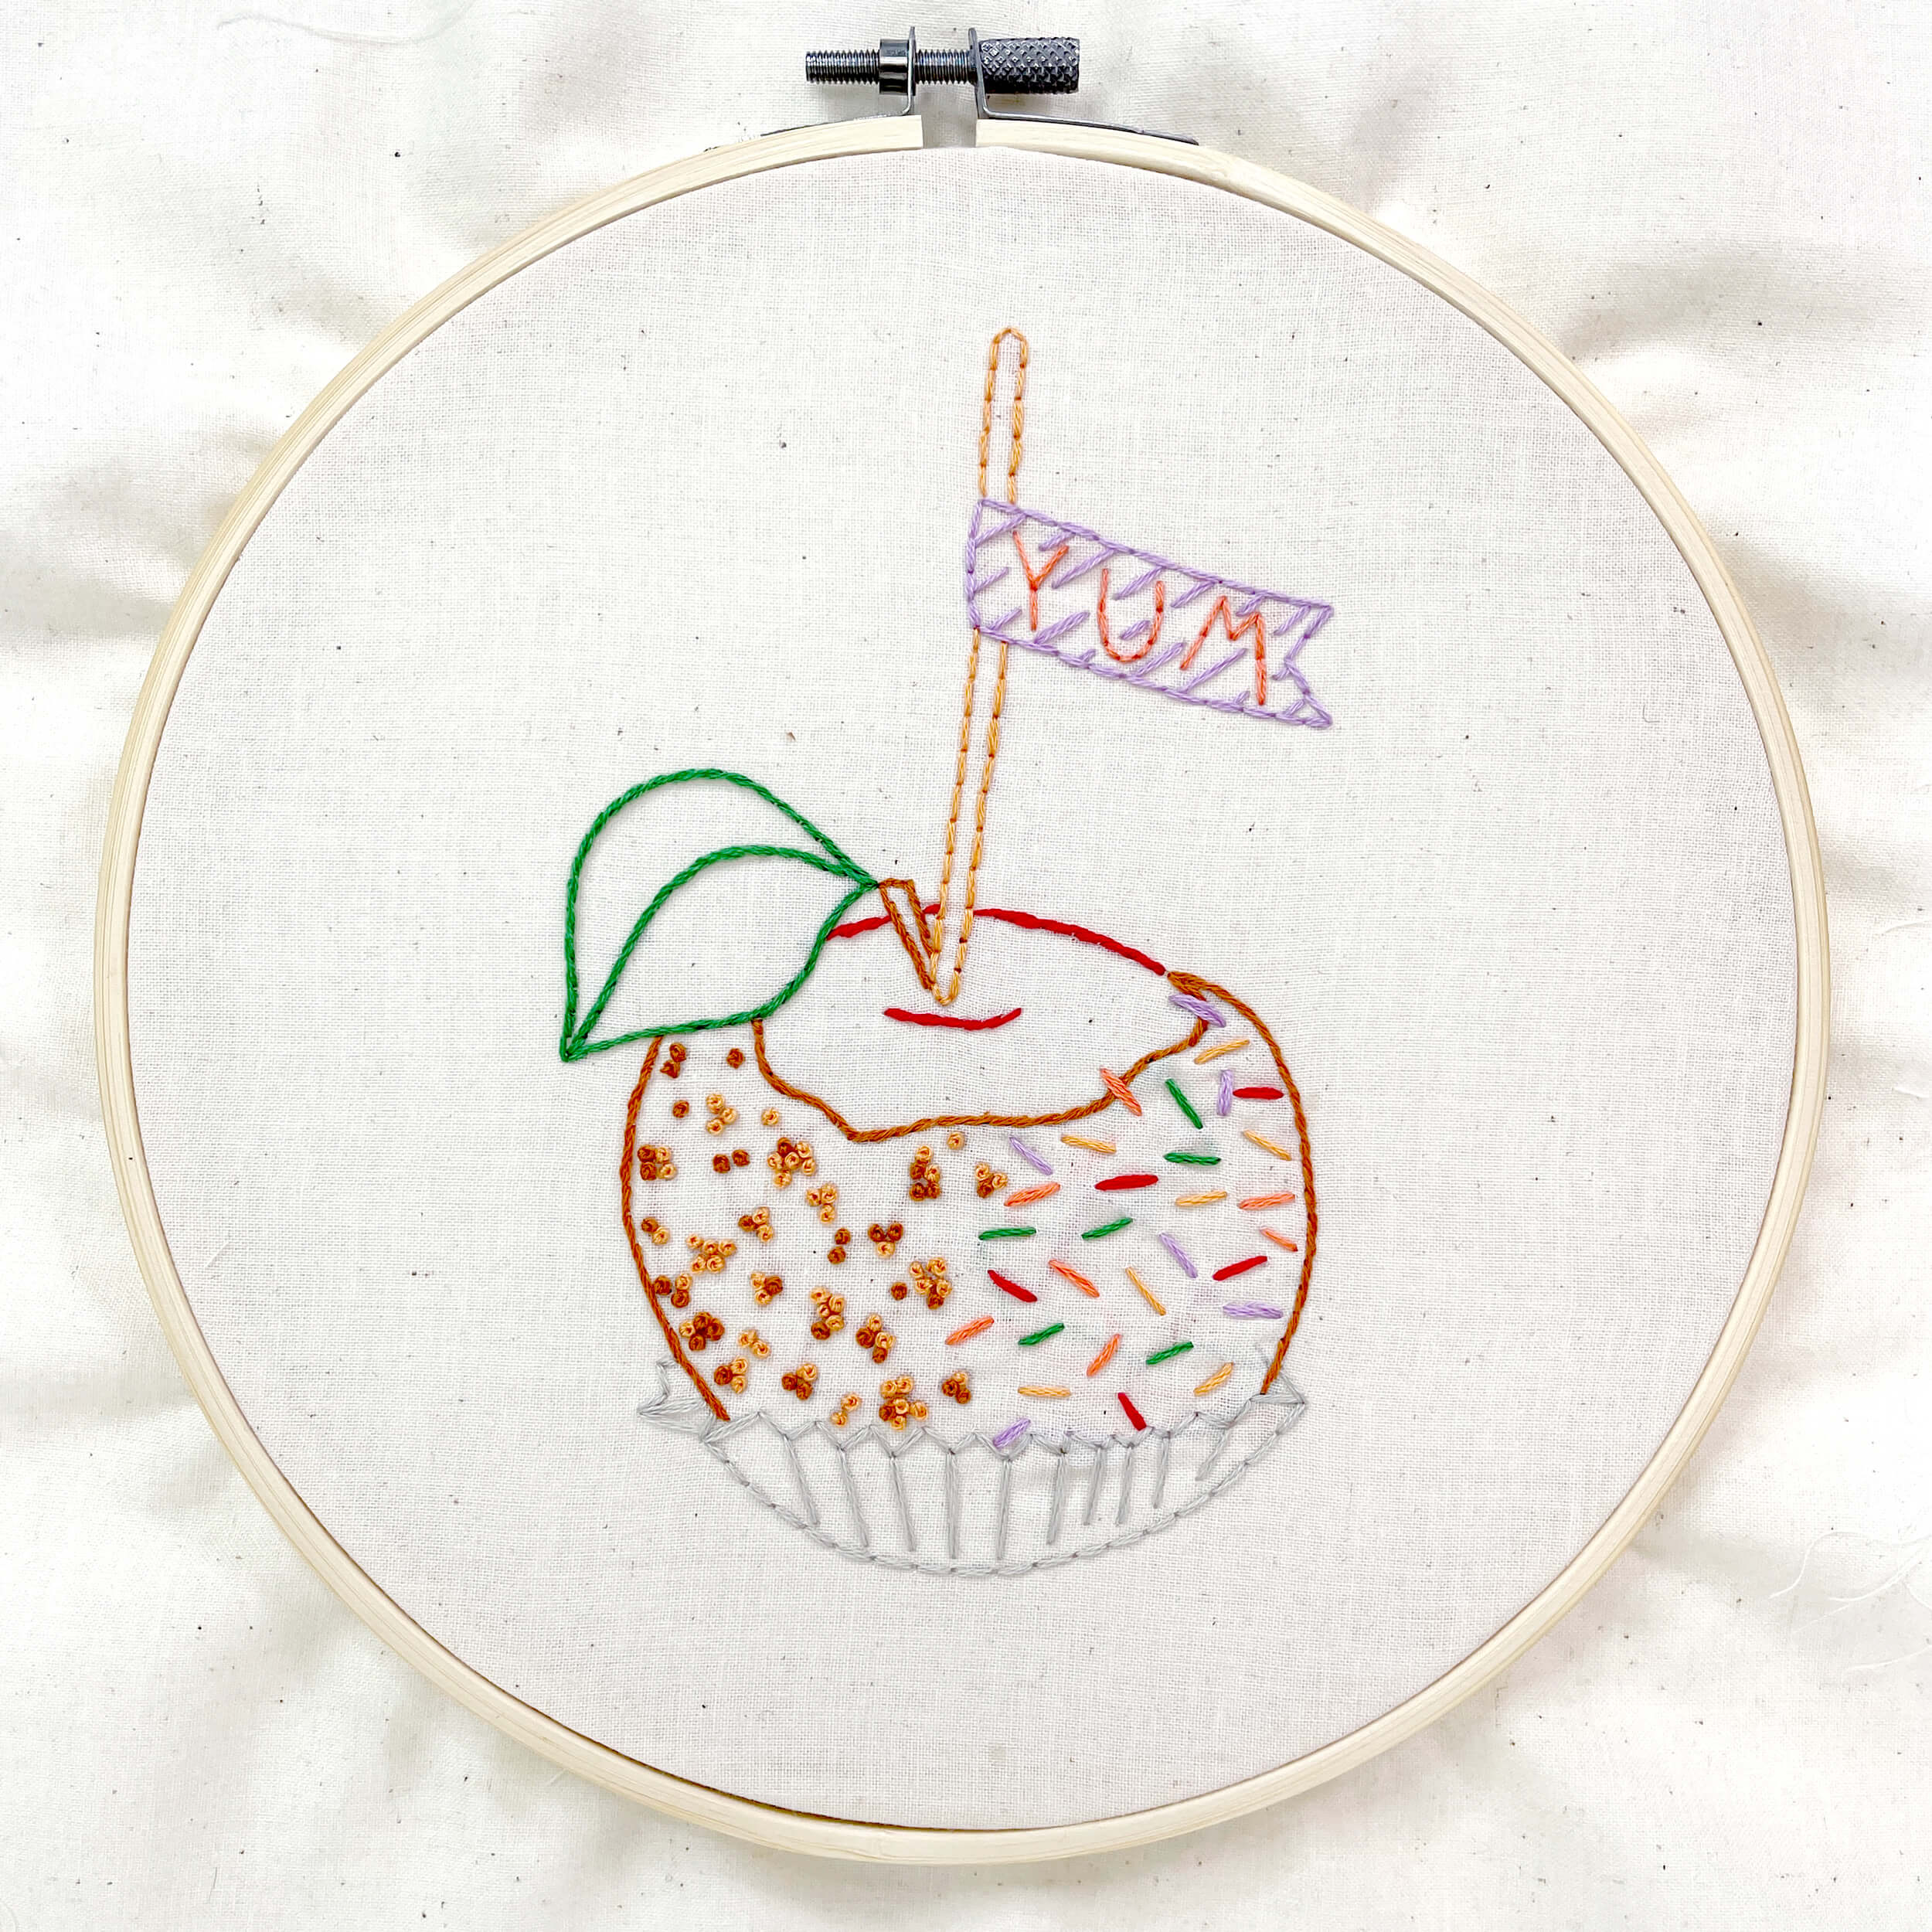 embroidery pattern of a caramel apple framed in a hoop